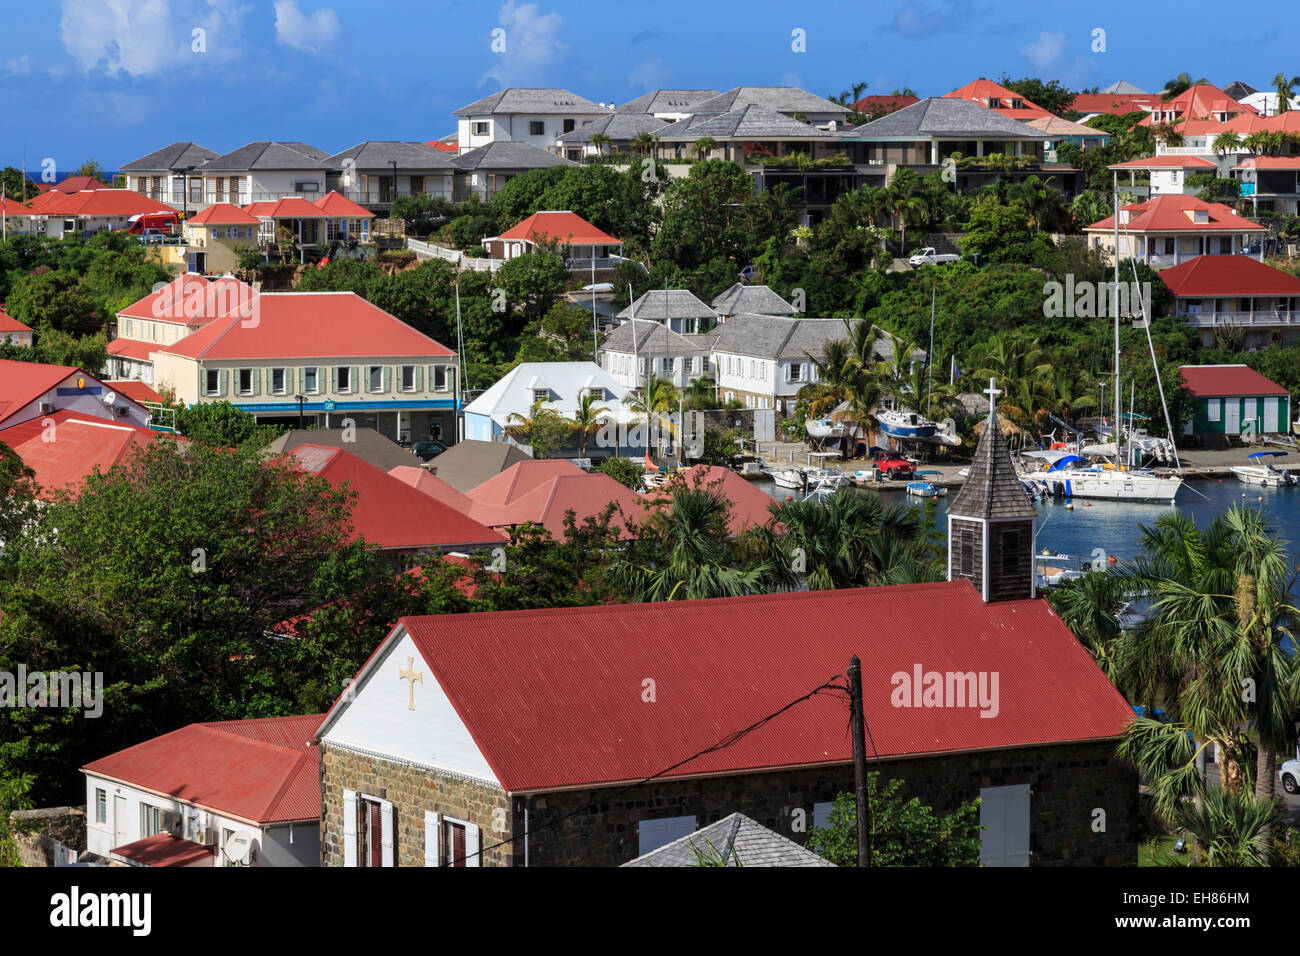 Elevated view of Anglican church and harbour, Gustavia, St. Barthelemy (St. Barts) (St. Barth), West Indies, Caribbean Stock Photo